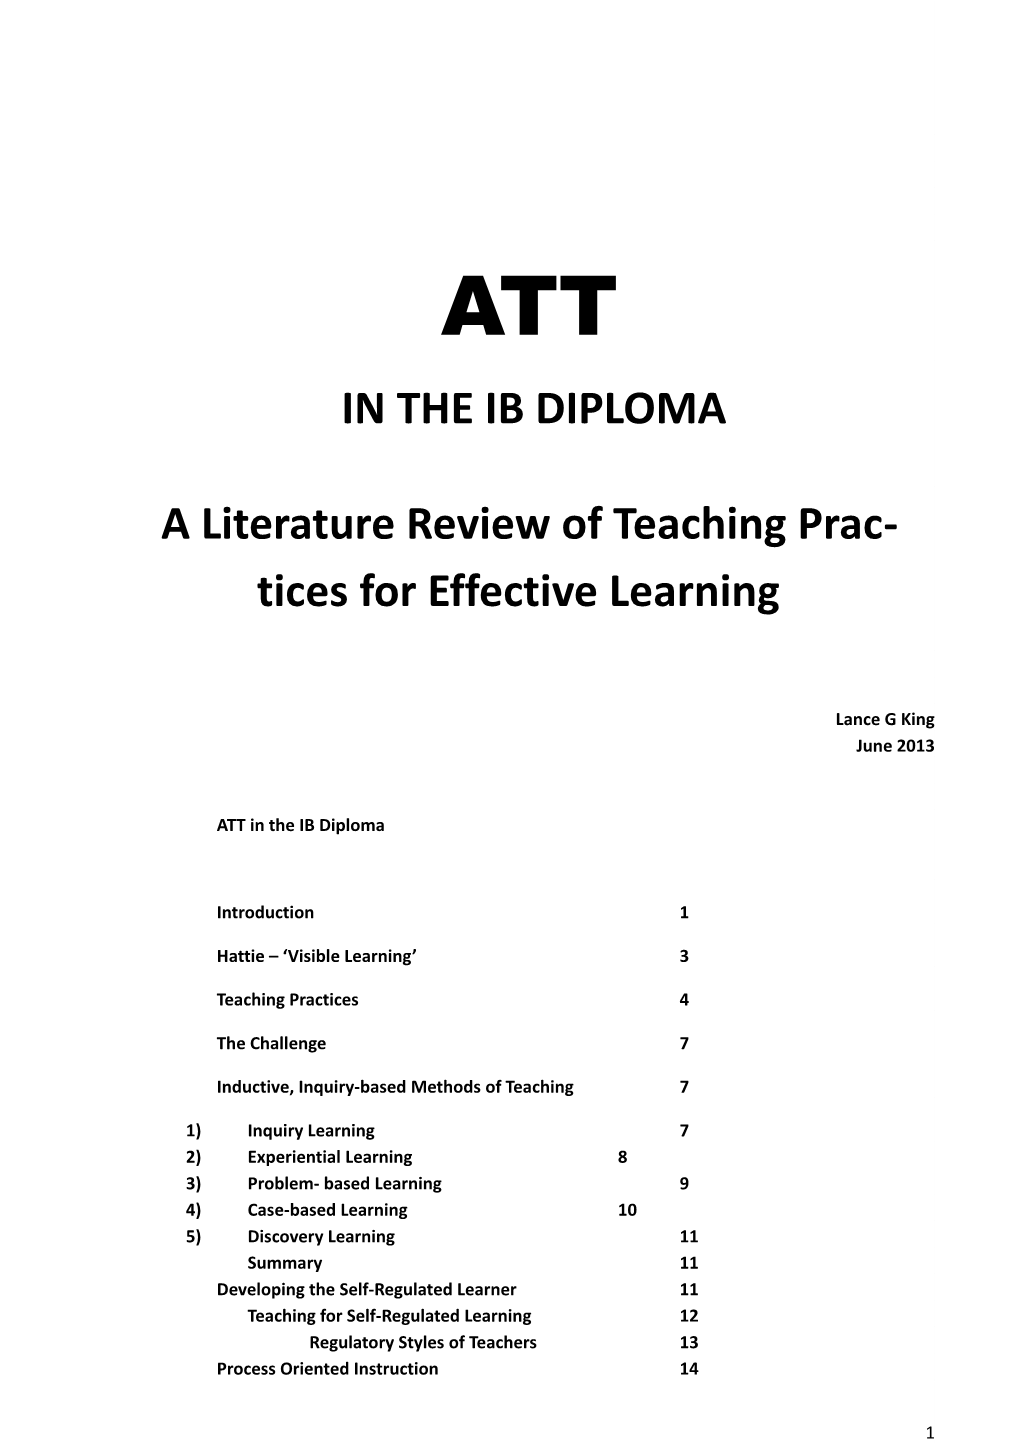 A Literature Review of Teaching Practices for Effective Learning